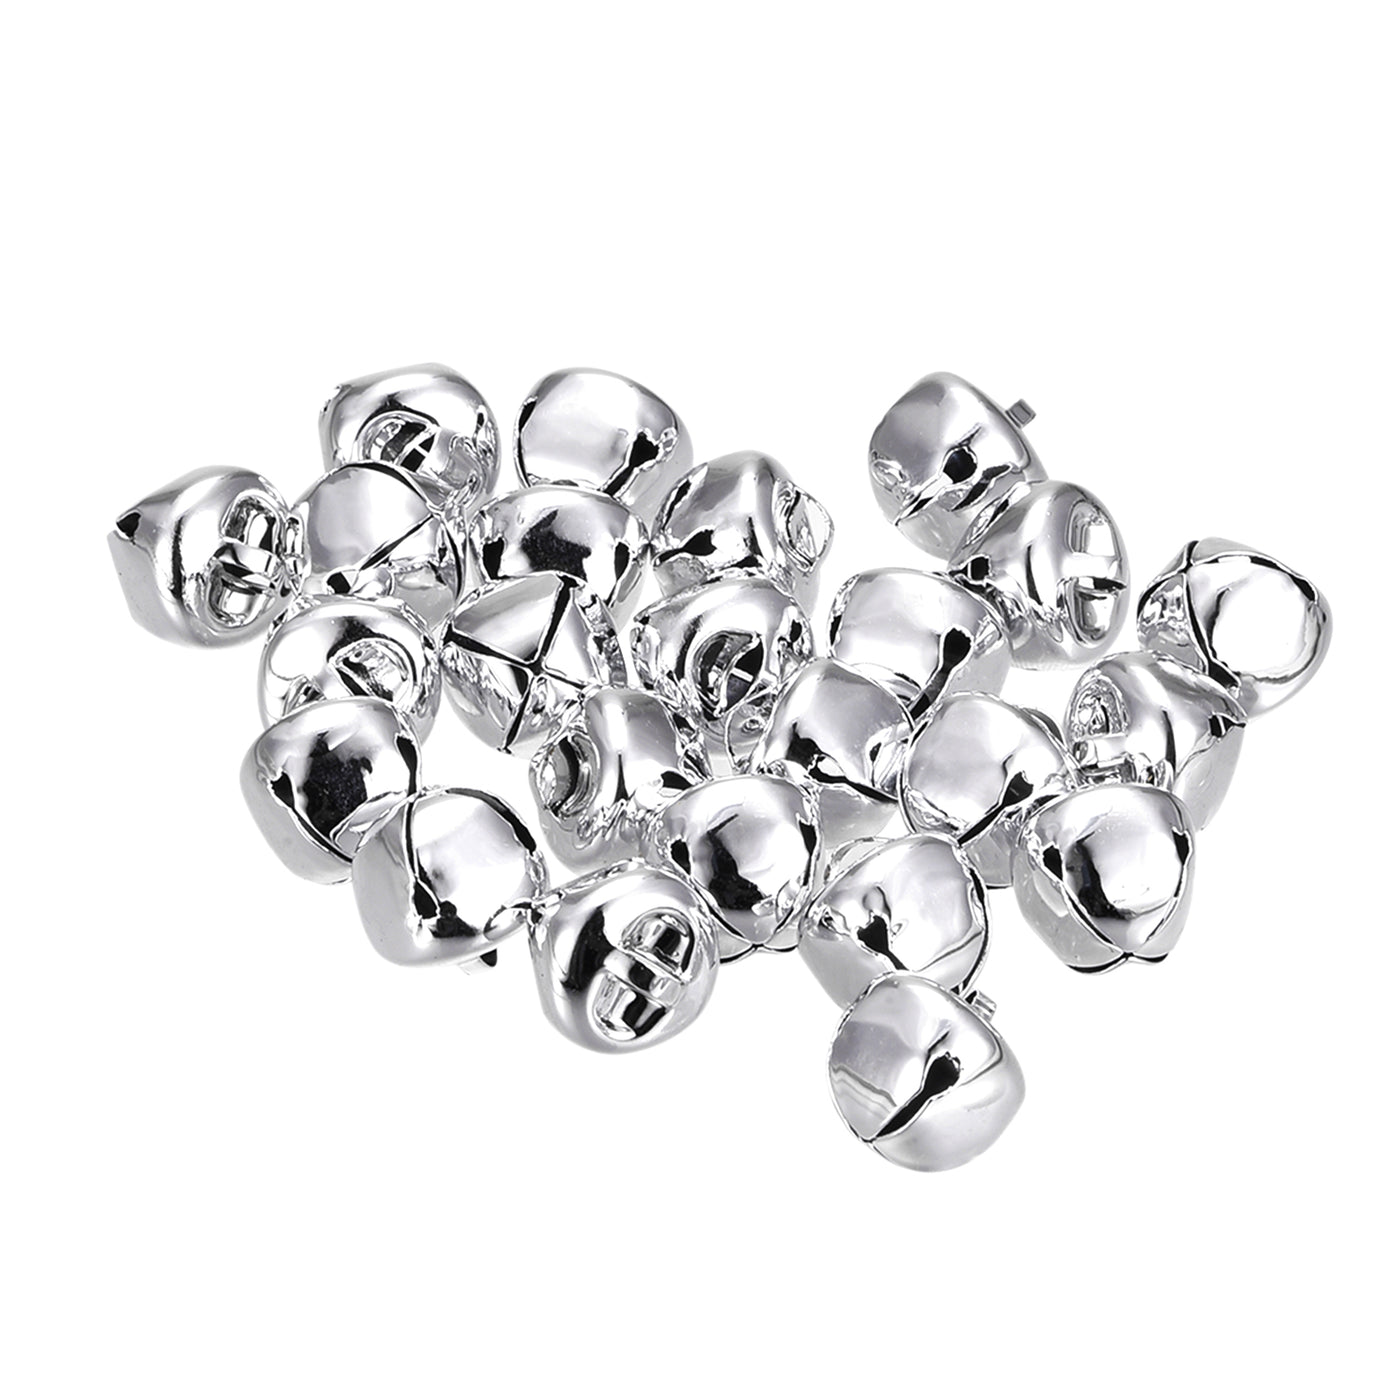 uxcell Uxcell Jingle Bells, 12mm 48pcs Small Bells for Crafts DIY Christmas, Silver Tone